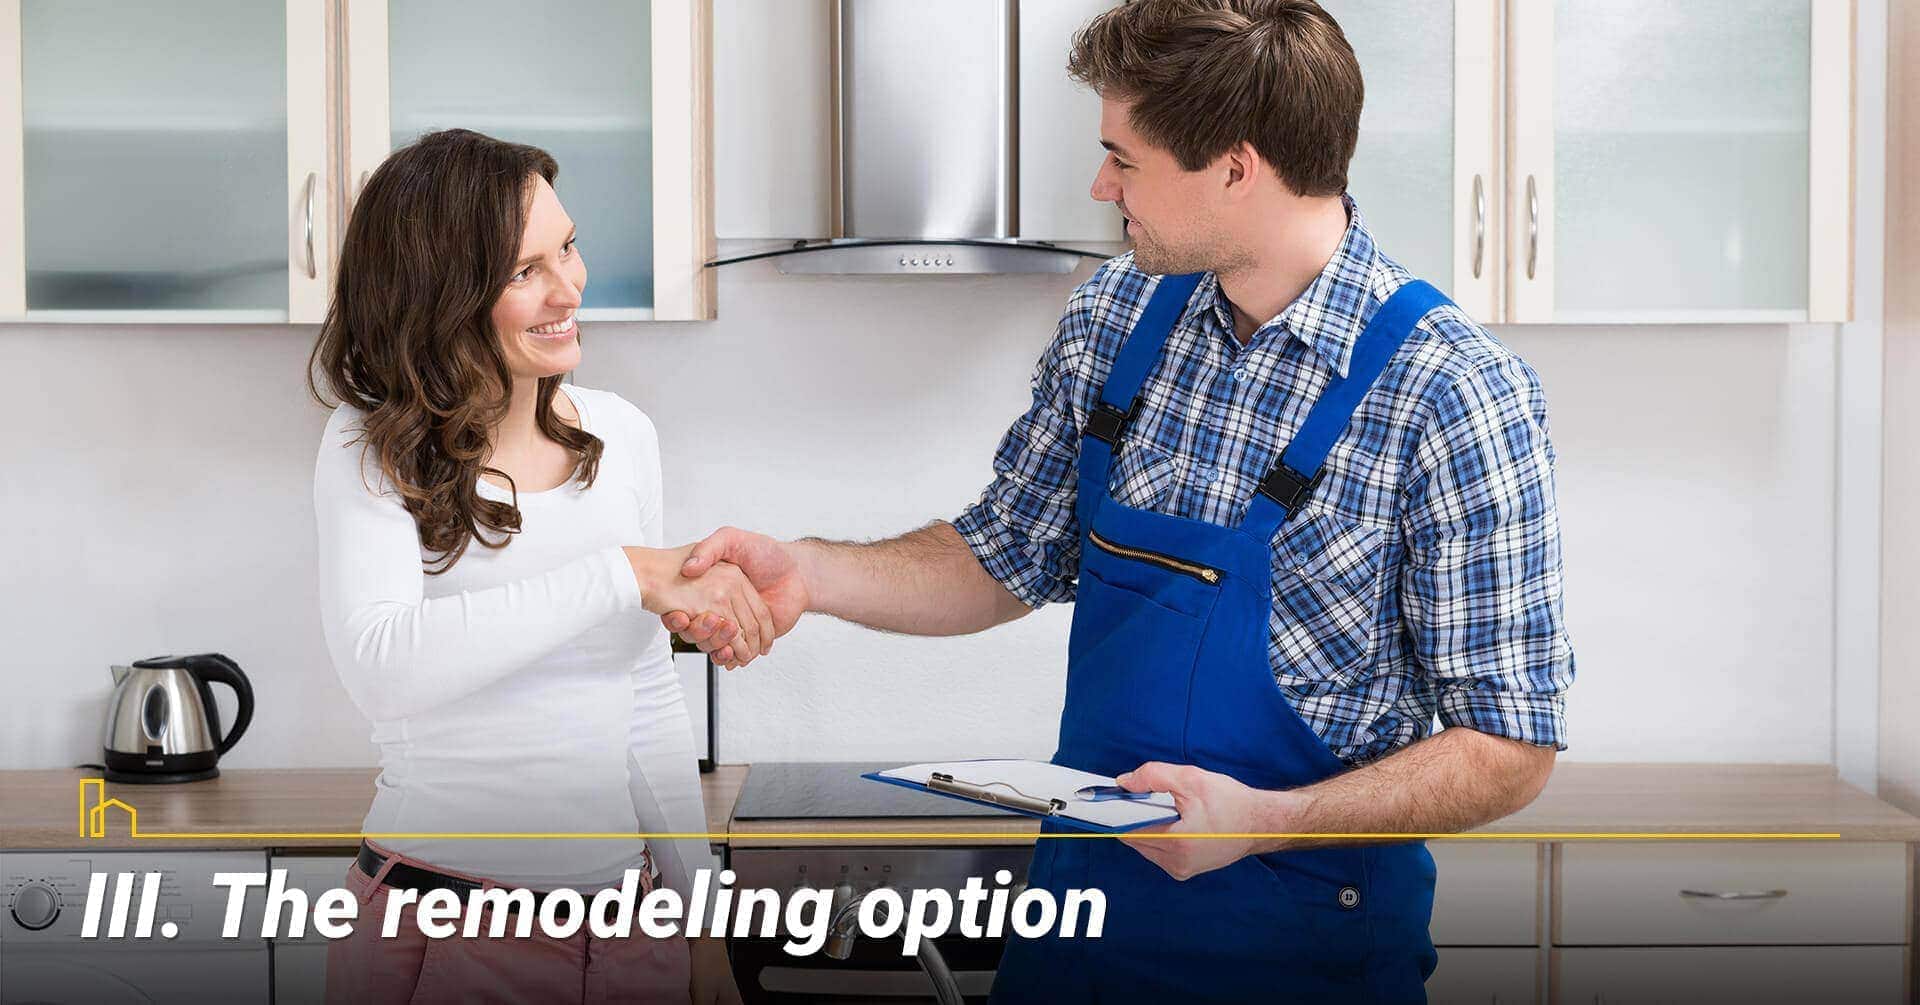 The remodeling option, planning to remodel your home